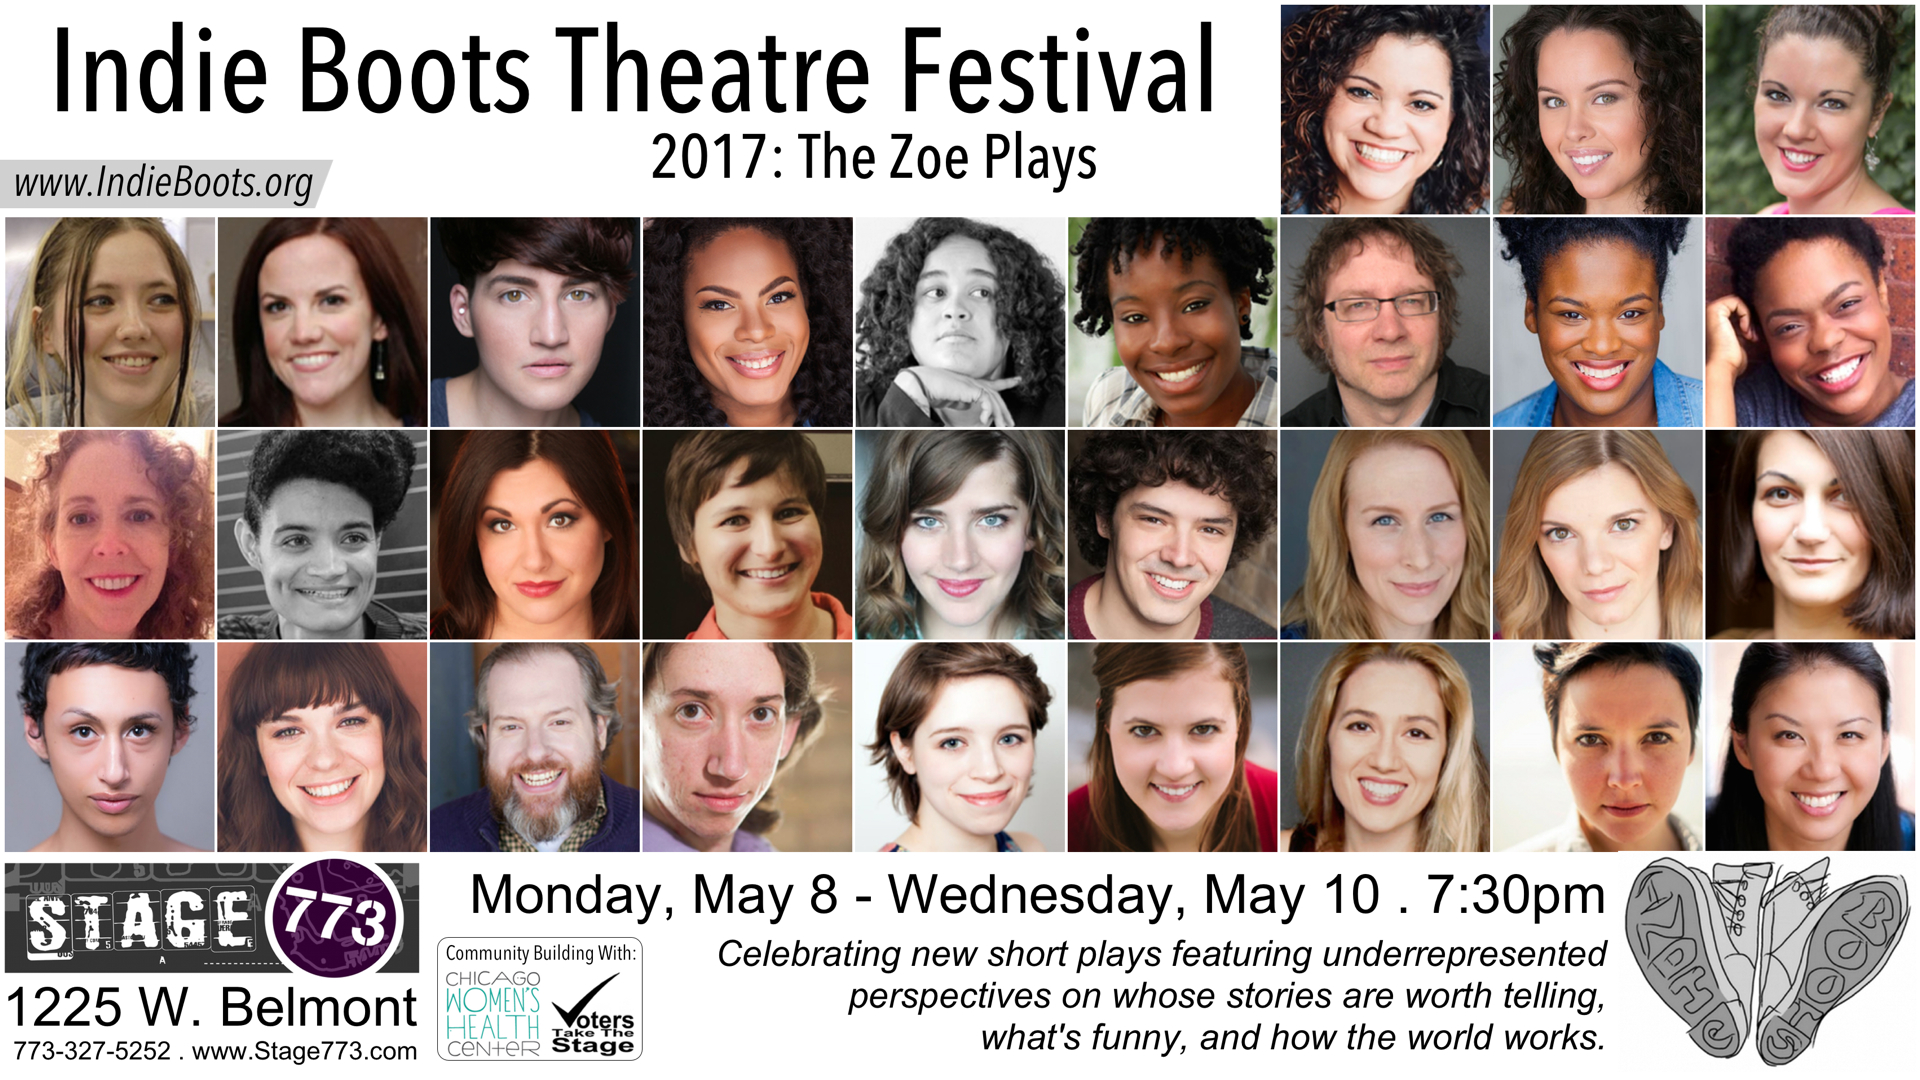 Indie Boots Theatre Festival 2017: The Zoe Plays postcard with actor headshots